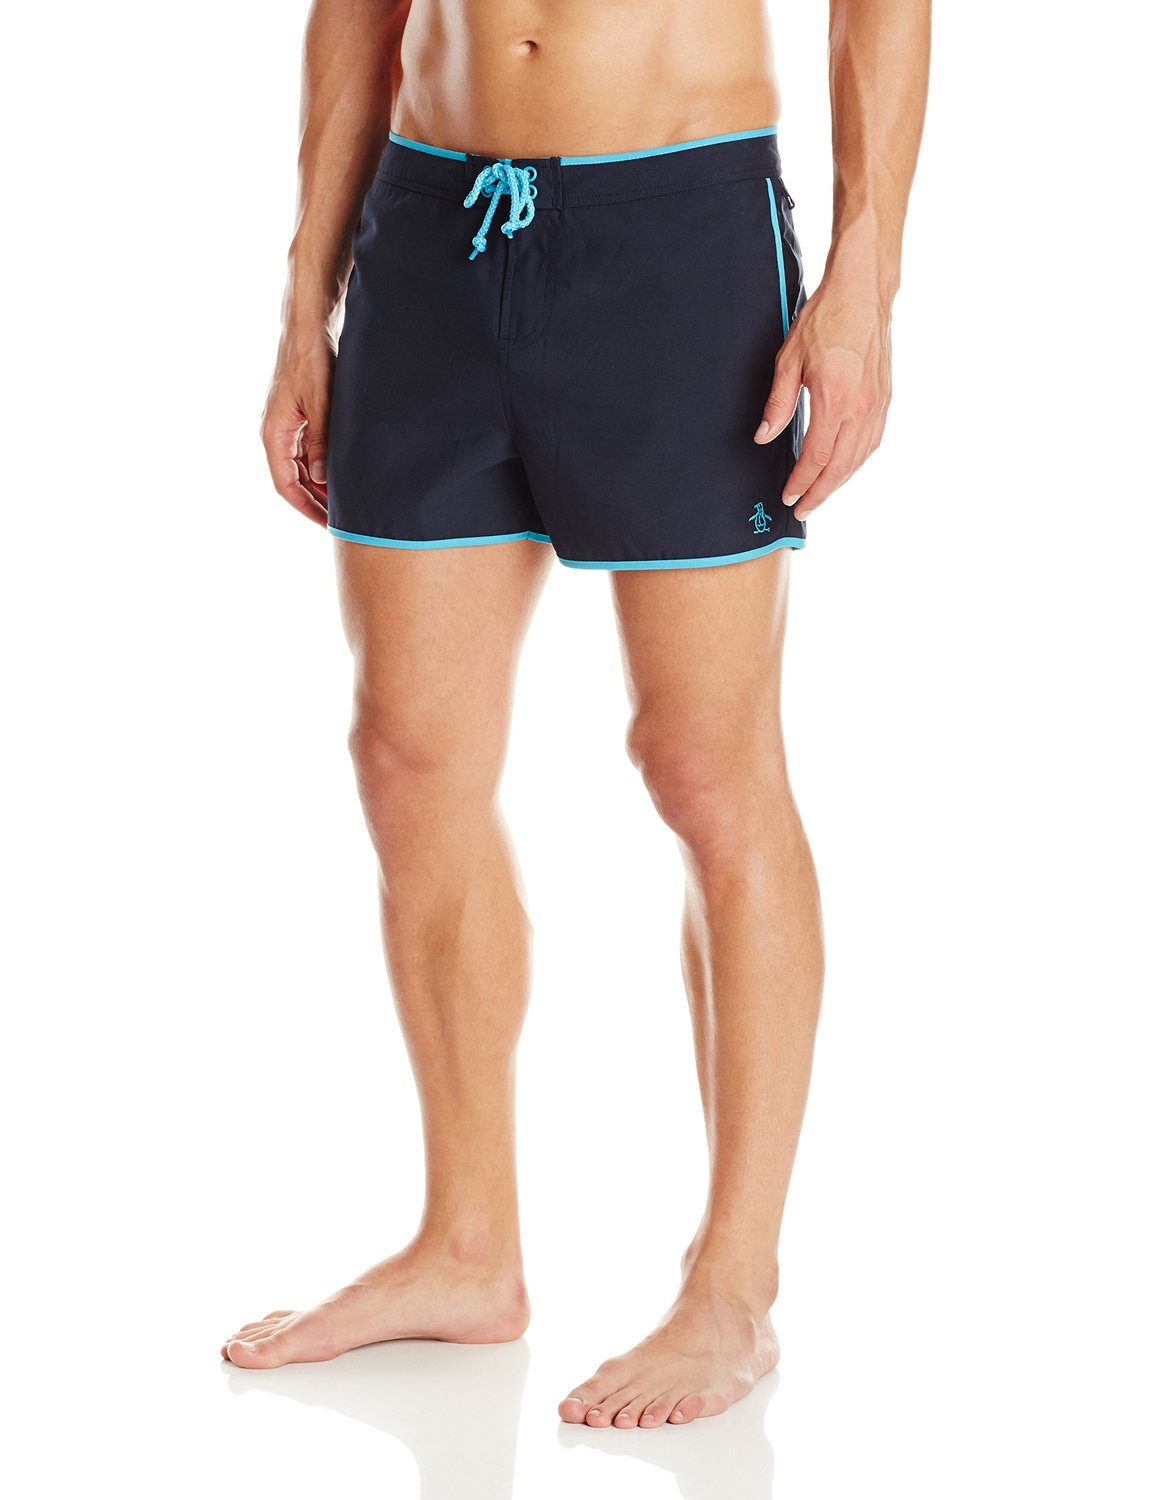 4. The Swim Short summer outfits